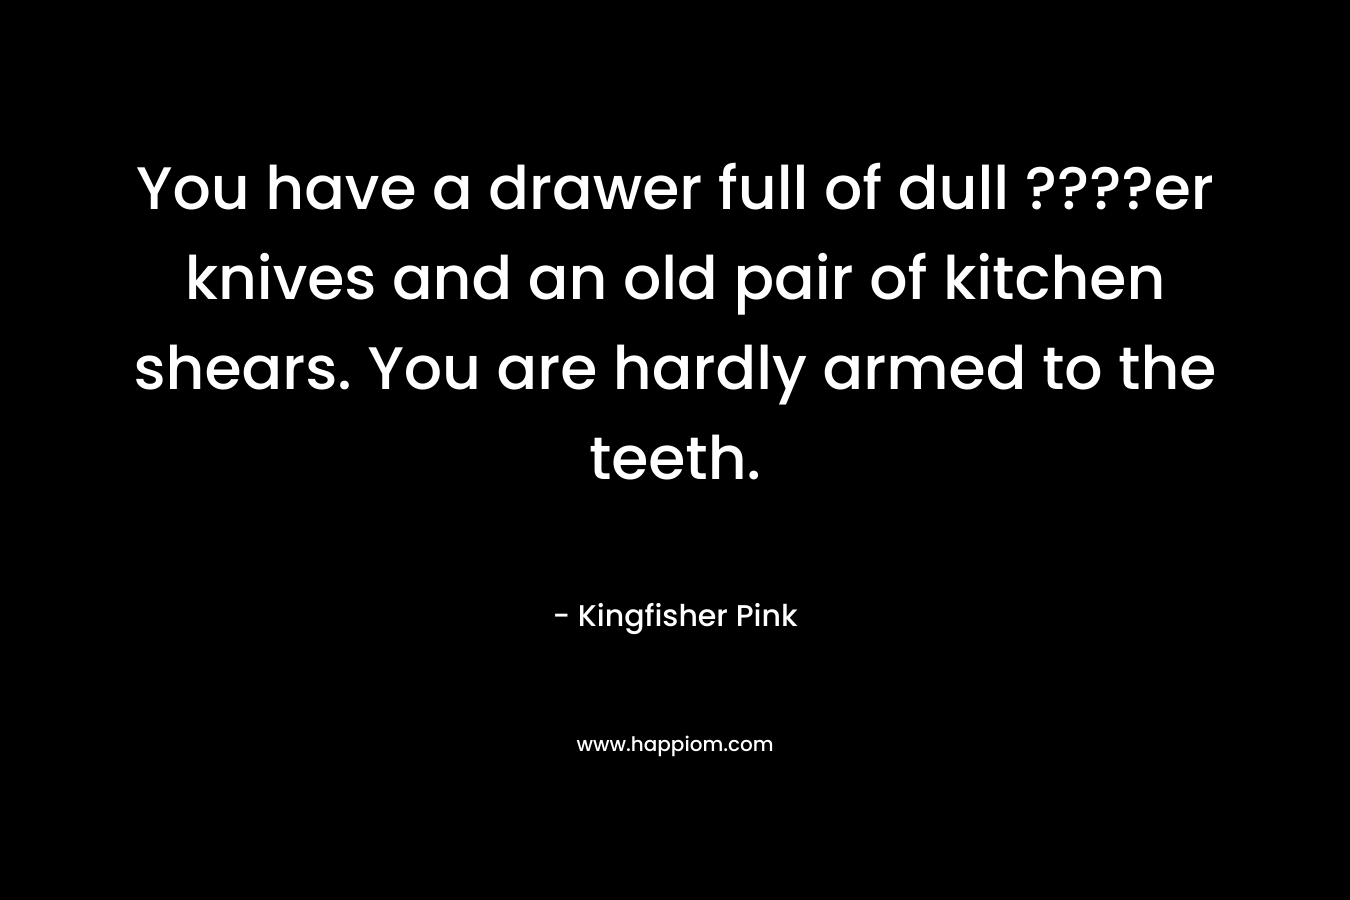 You have a drawer full of dull ????er knives and an old pair of kitchen shears. You are hardly armed to the teeth. – Kingfisher Pink